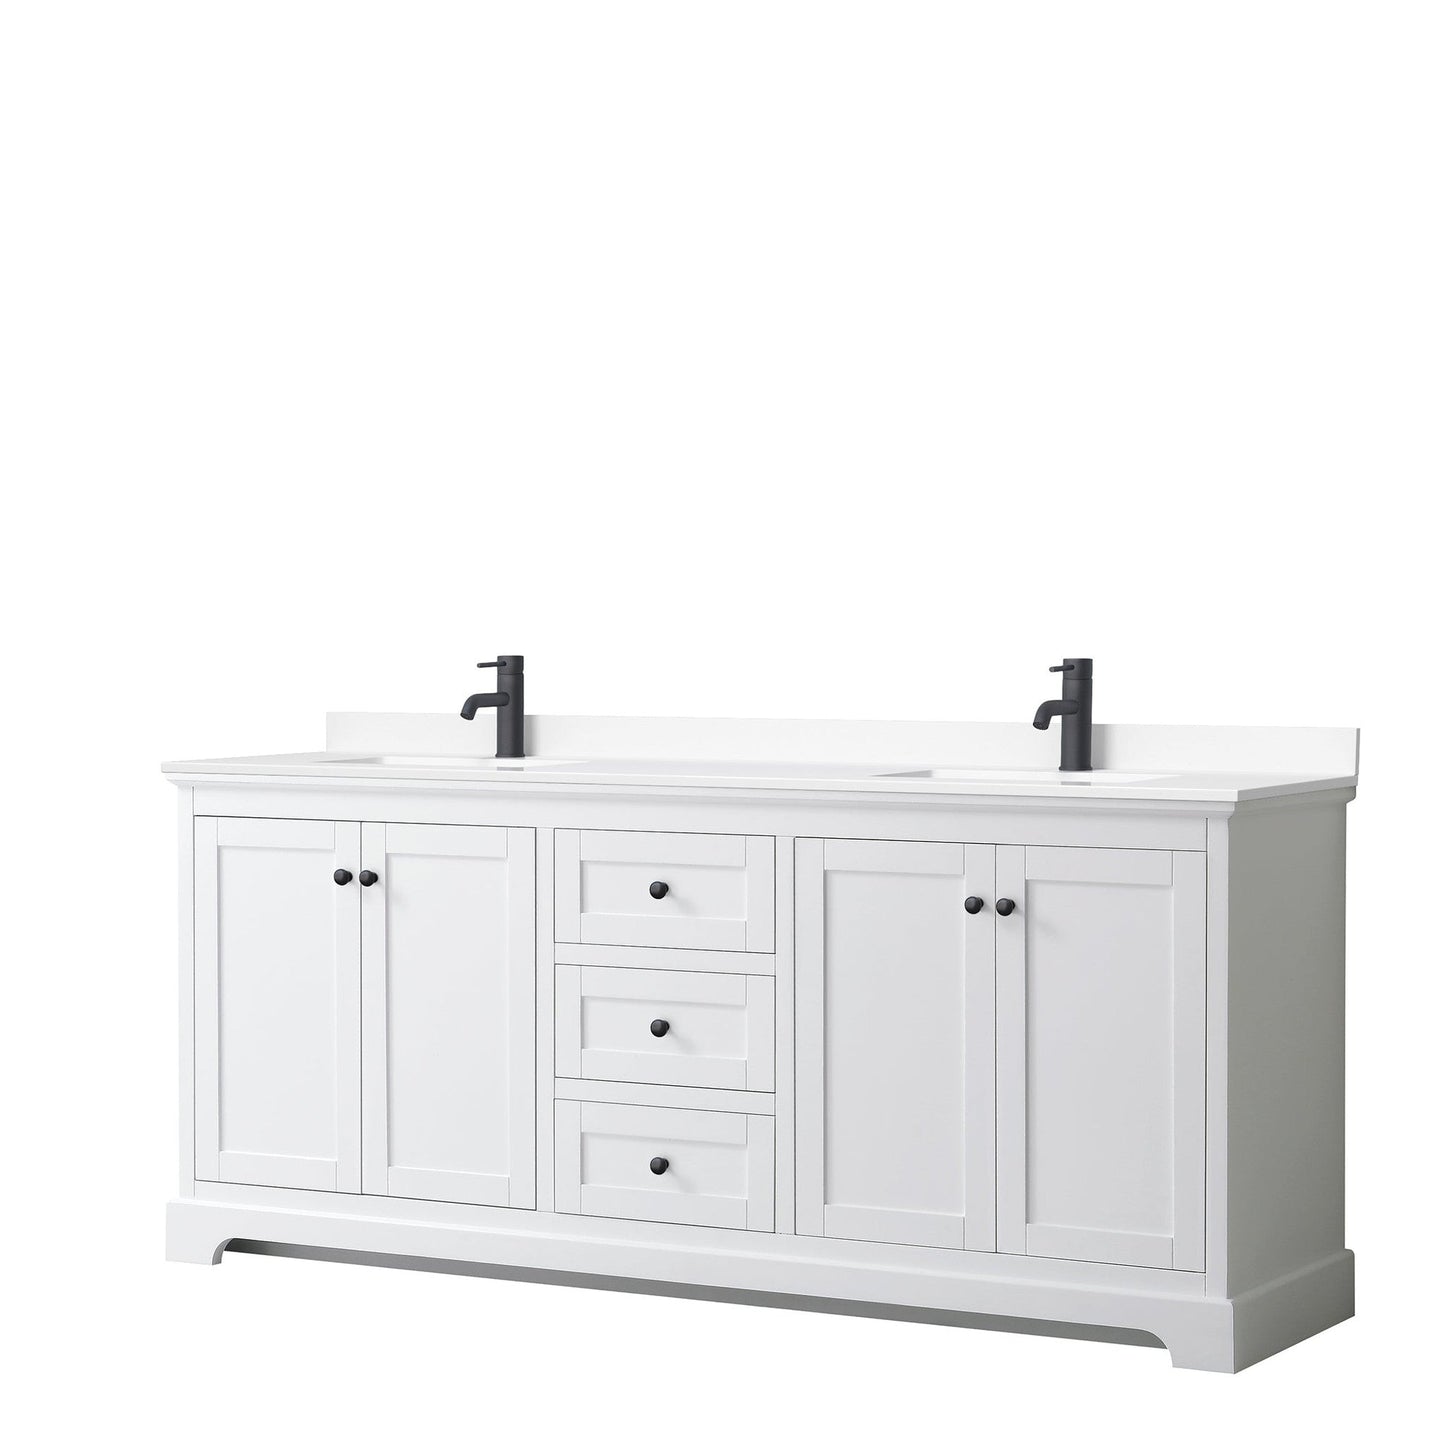 Avery 80" Double Bathroom Vanity in White, White Cultured Marble Countertop, Undermount Square Sinks, Matte Black Trim